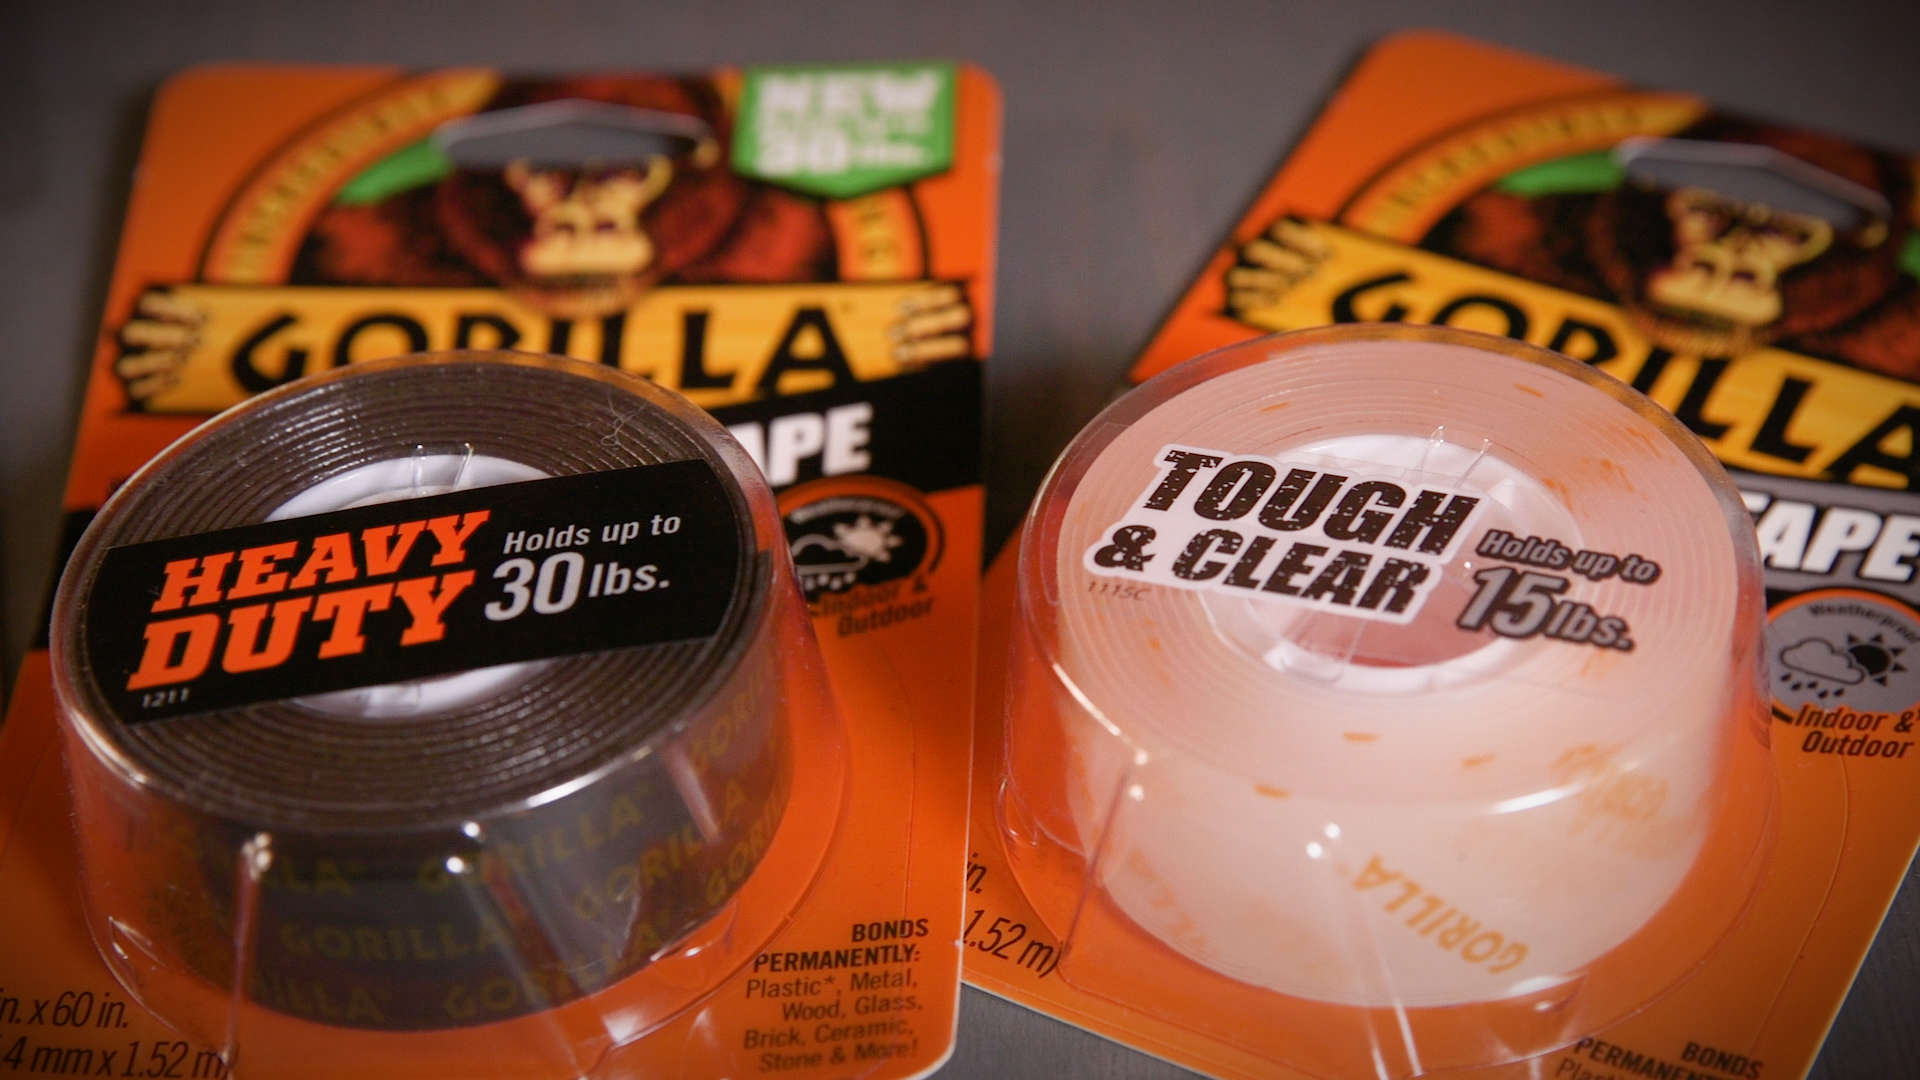 Gorilla Double Sided Tough & Clear Mounting Tape (Indoor & Outdoor